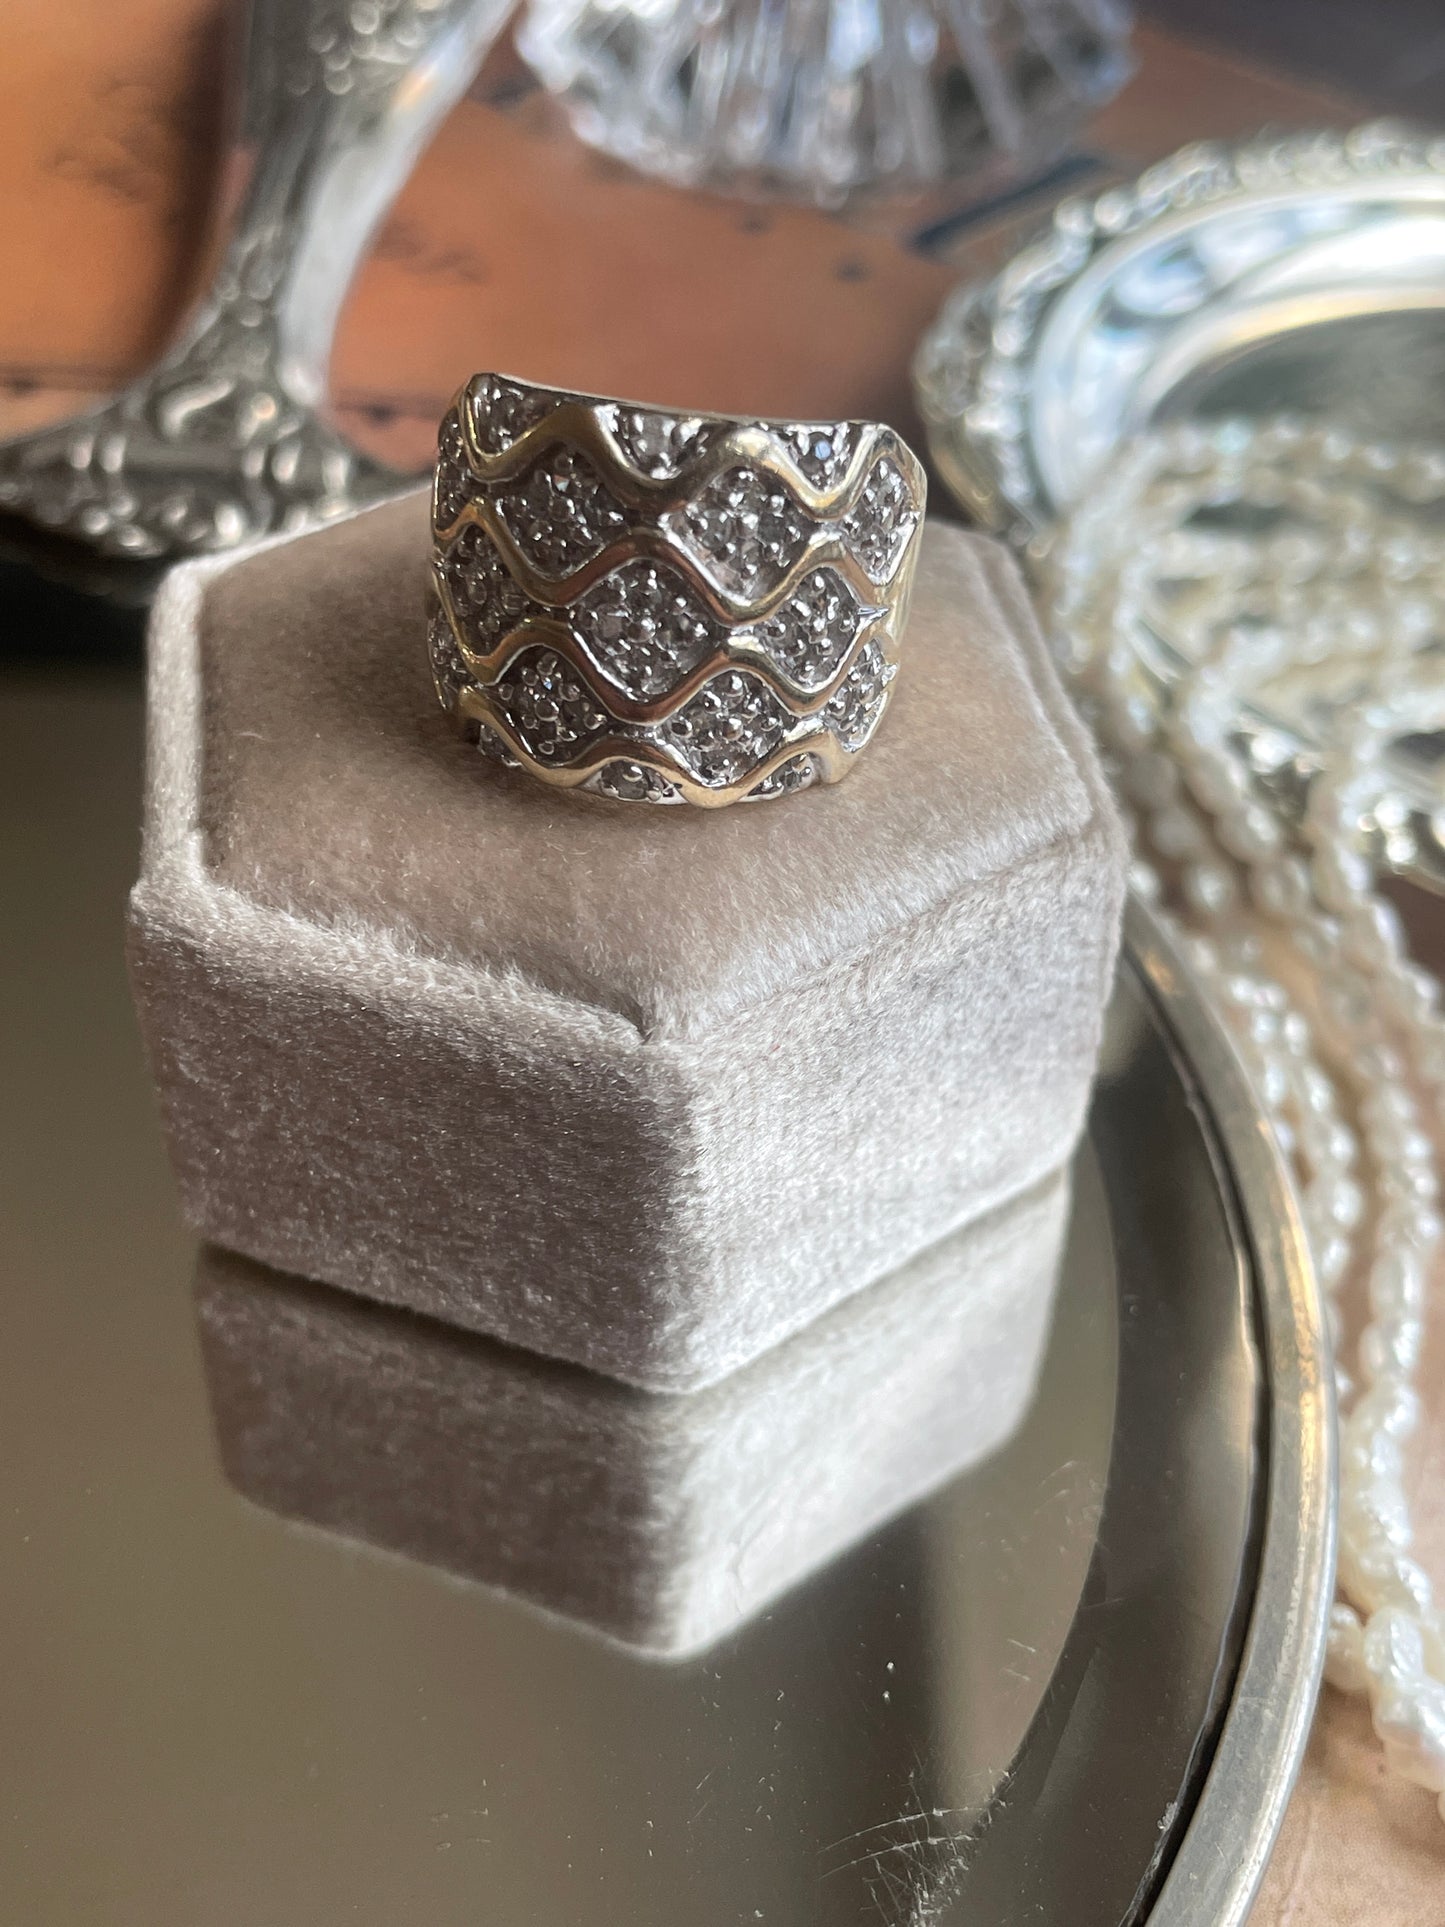 The "Hearst Tower" Ring